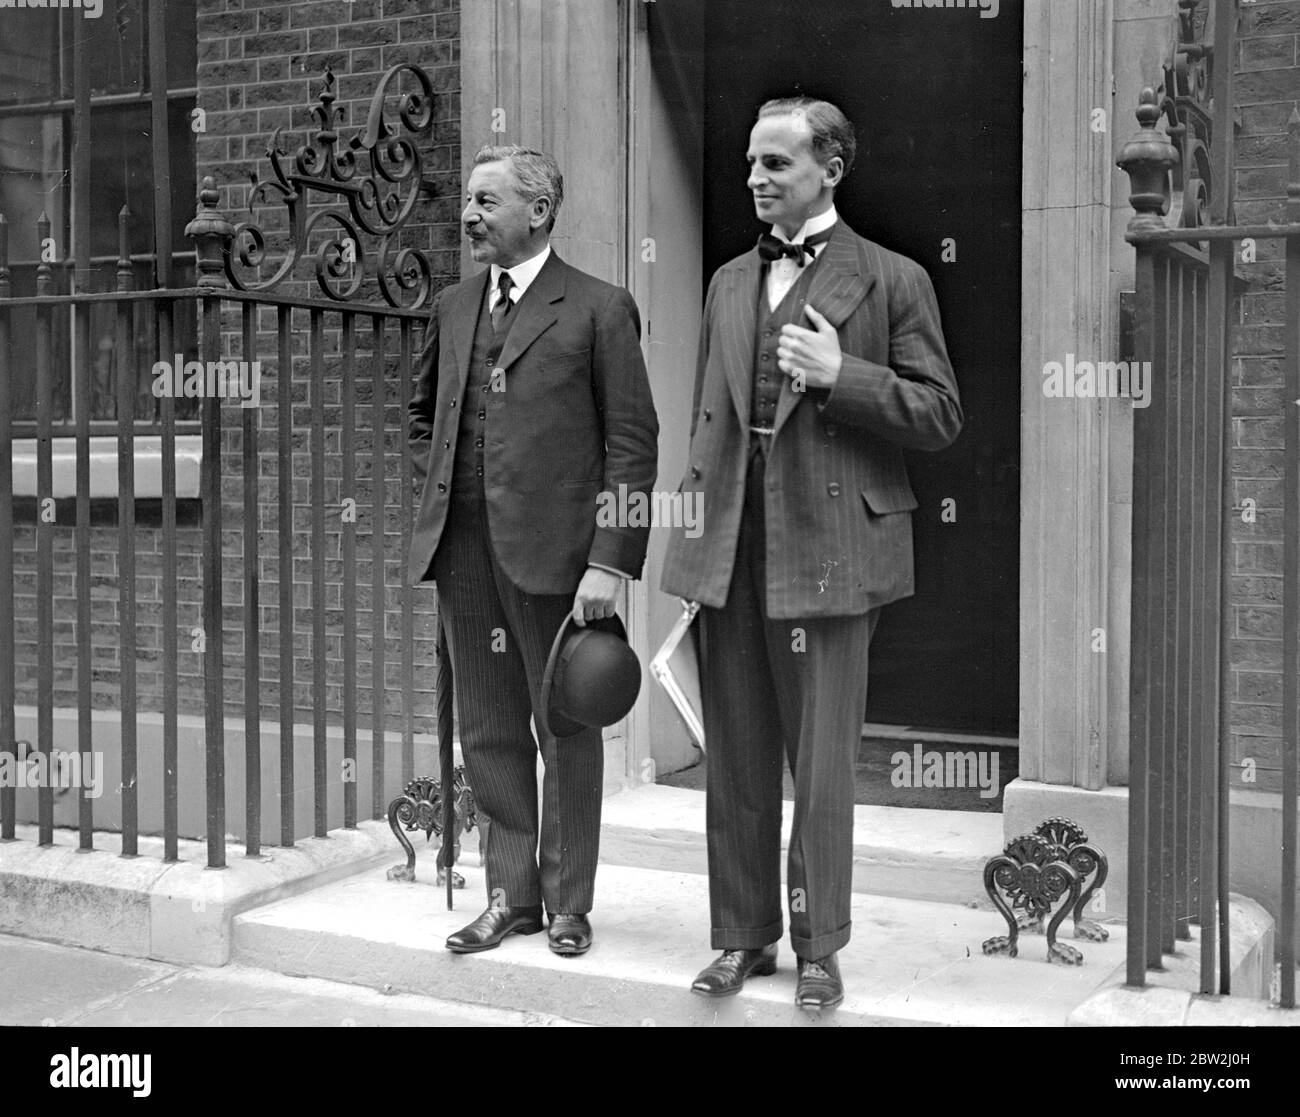 Downing Street. Neville Chamberlain and Sir Archibald Sinclair. Chamberlain, [Arthur] Neville British Conservative politician; lord mayor of Birmingham 1915-1916; British health secretary 1923, 1924-1929; British chancellor of the exchequer 1923-1924, 1931-1937; British prime minister 1937-1940; signed Munich Pact 1938; recognized Francisco Franco's regime in Spain 1939; initiated peacetime conscription 1939; declared war on Germany after German invasion of Poland 1939; resigned as prime minister after losing vote of confidence in House of Commons; notorious for appeasement policy toward total Stock Photo